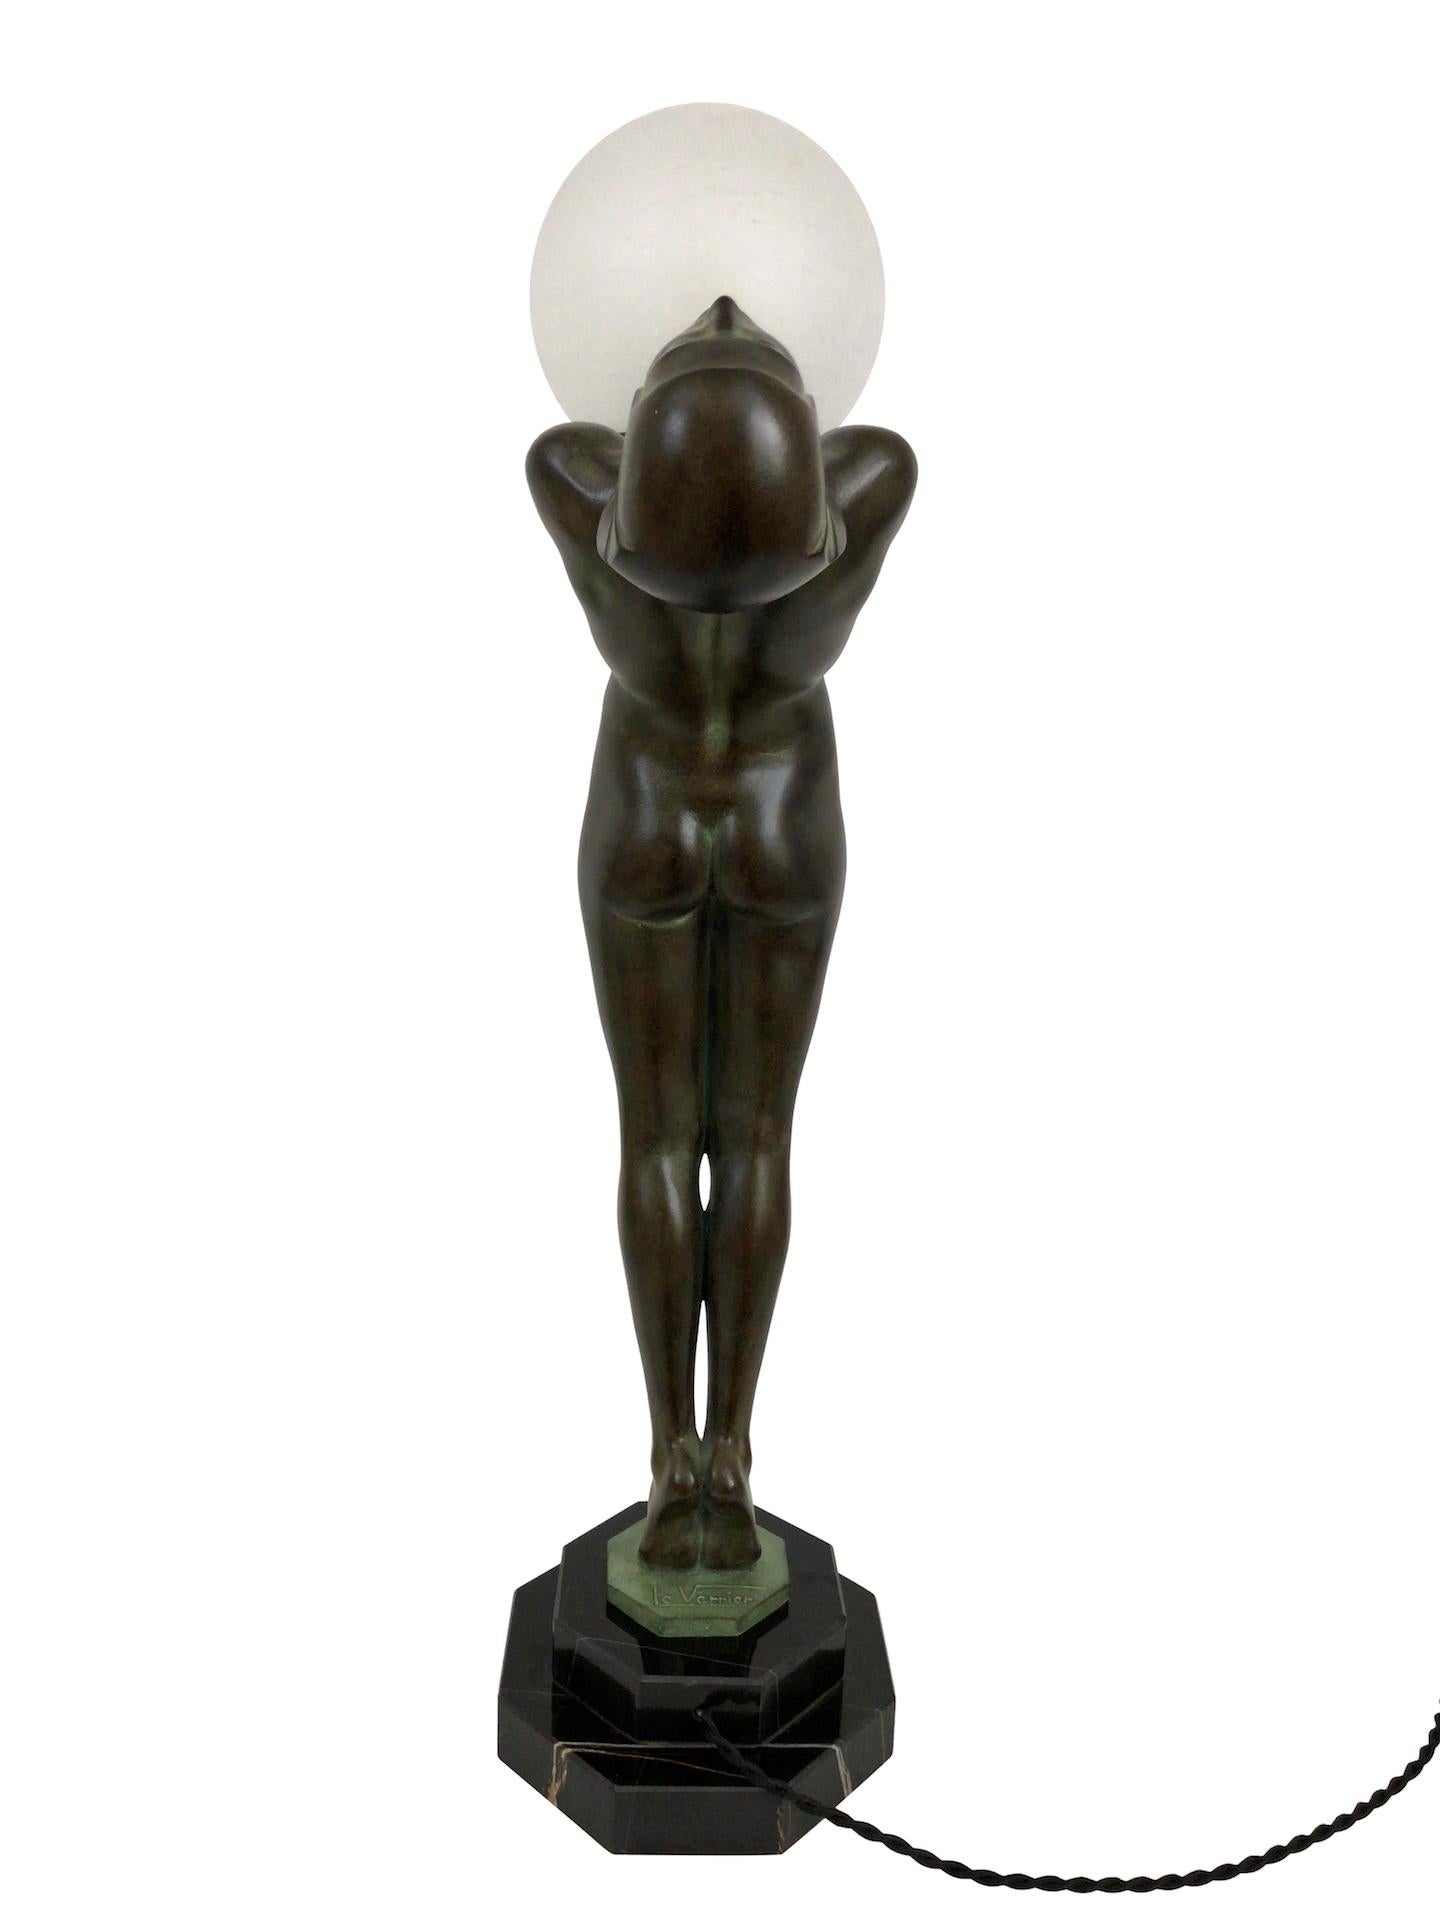 Patinated Art Deco Lumina Sculpture Clarté Lamp Nude Dancer with a Ball by Max Le Verrier For Sale